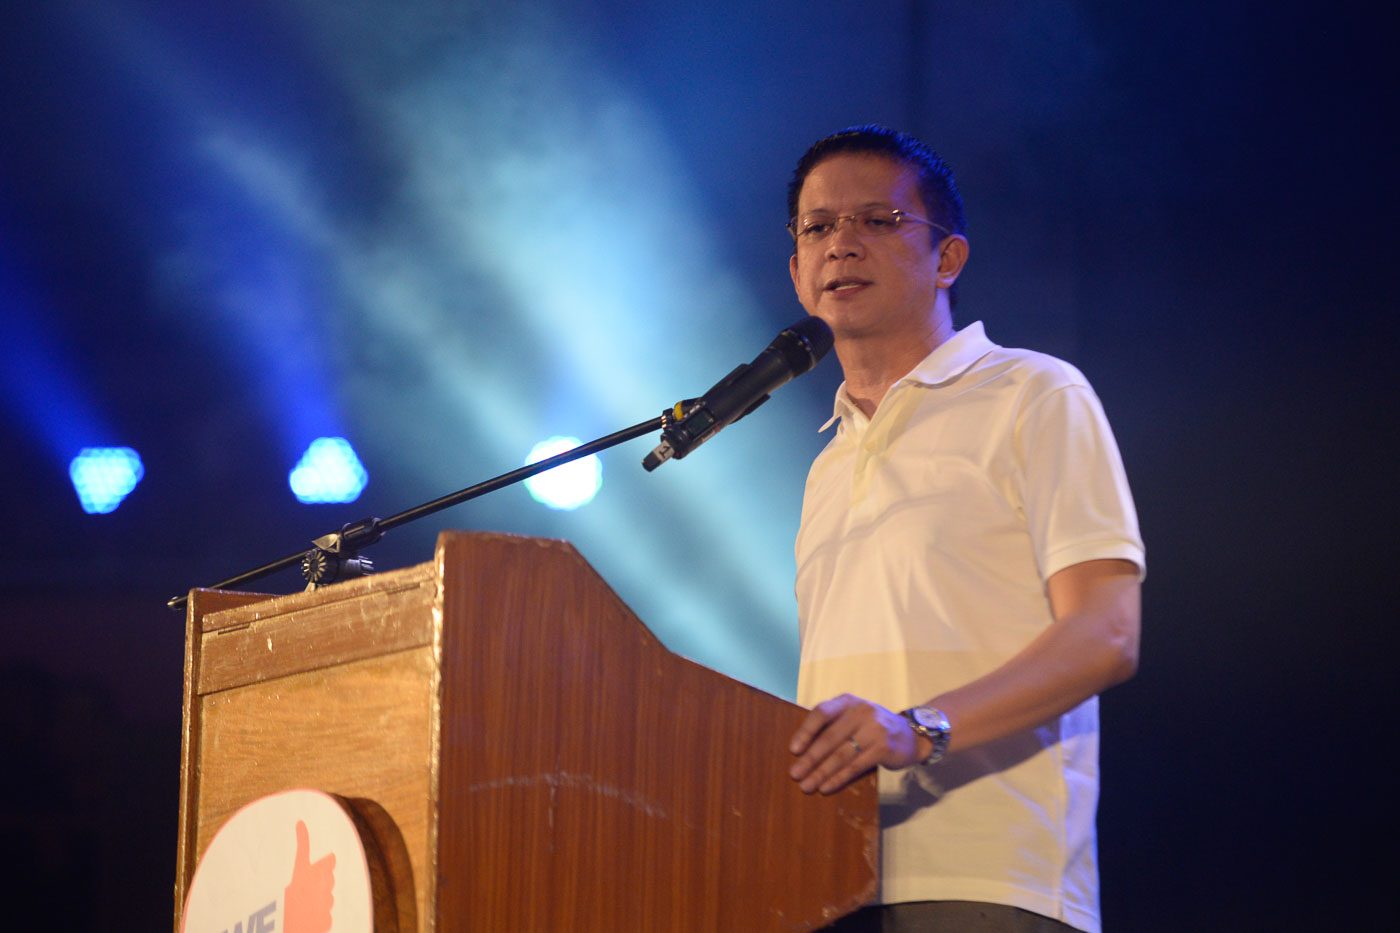 11 things to know about Chiz Escudero